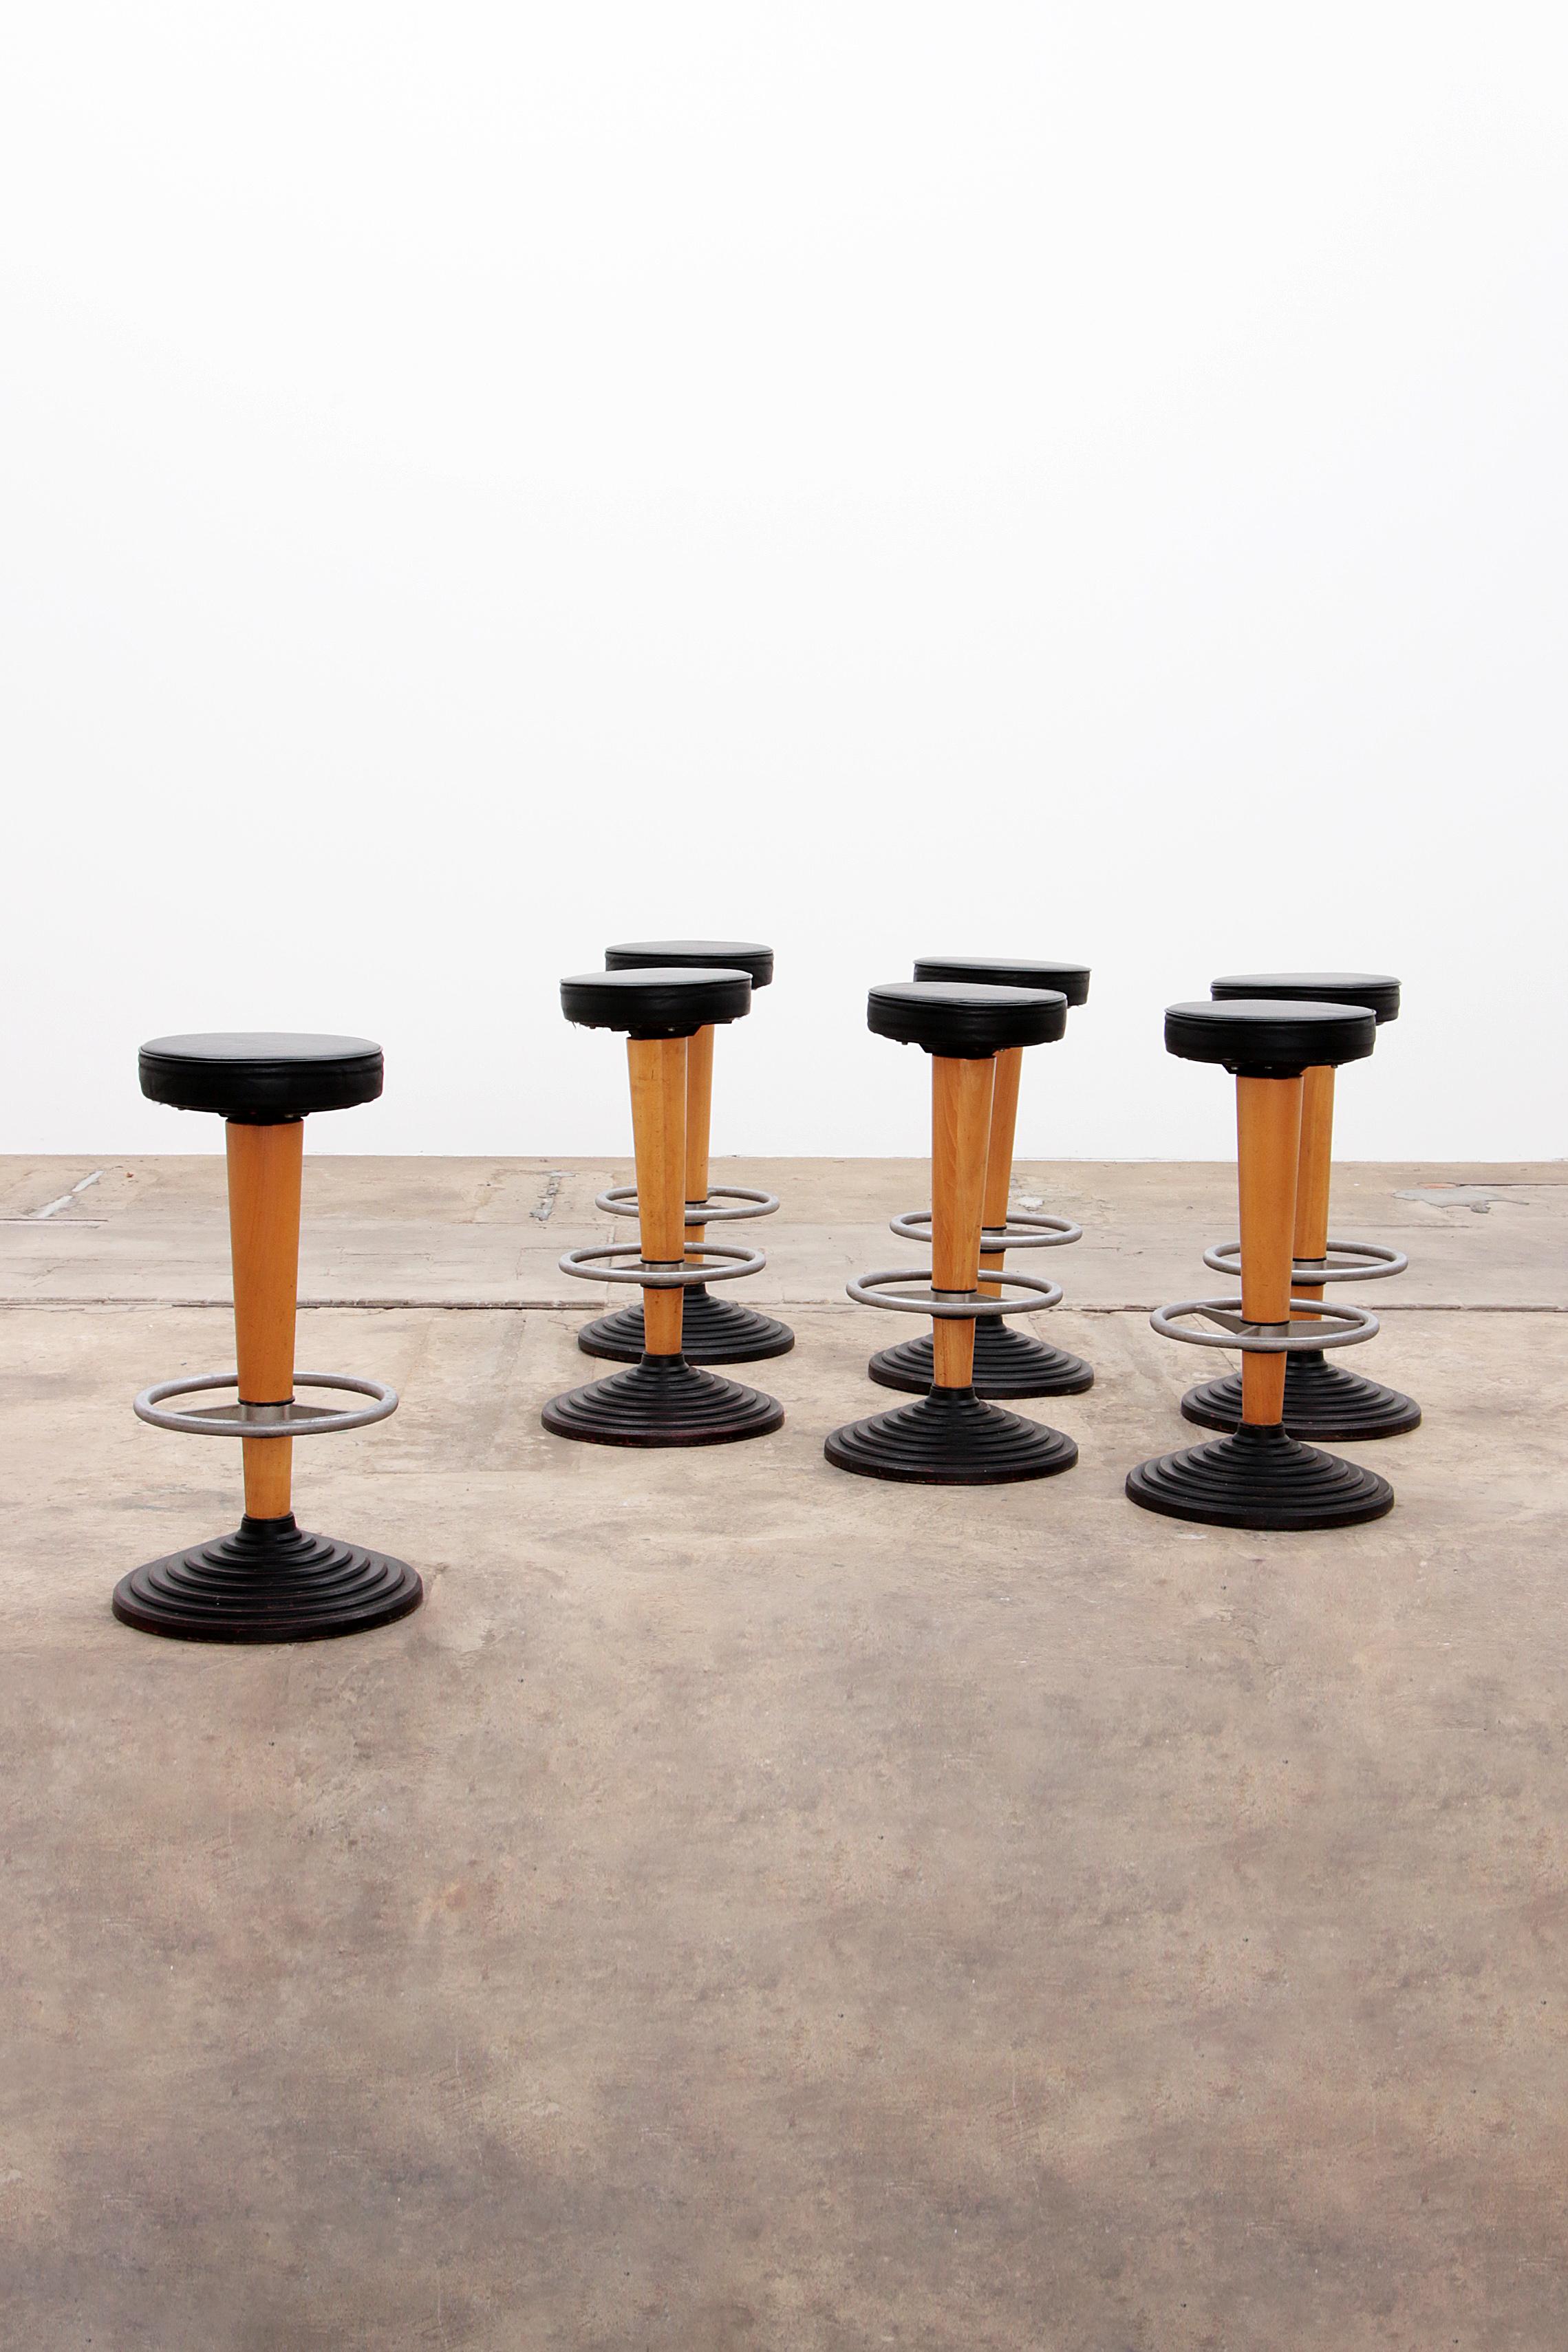 Discover the ultimate seating comfort with our top quality bar stools, inspired by the 60s. These stylish stools have a sturdy cast iron base, a luxurious black leather seat and a handy metal footrest. Perfect for any setting, from classic to